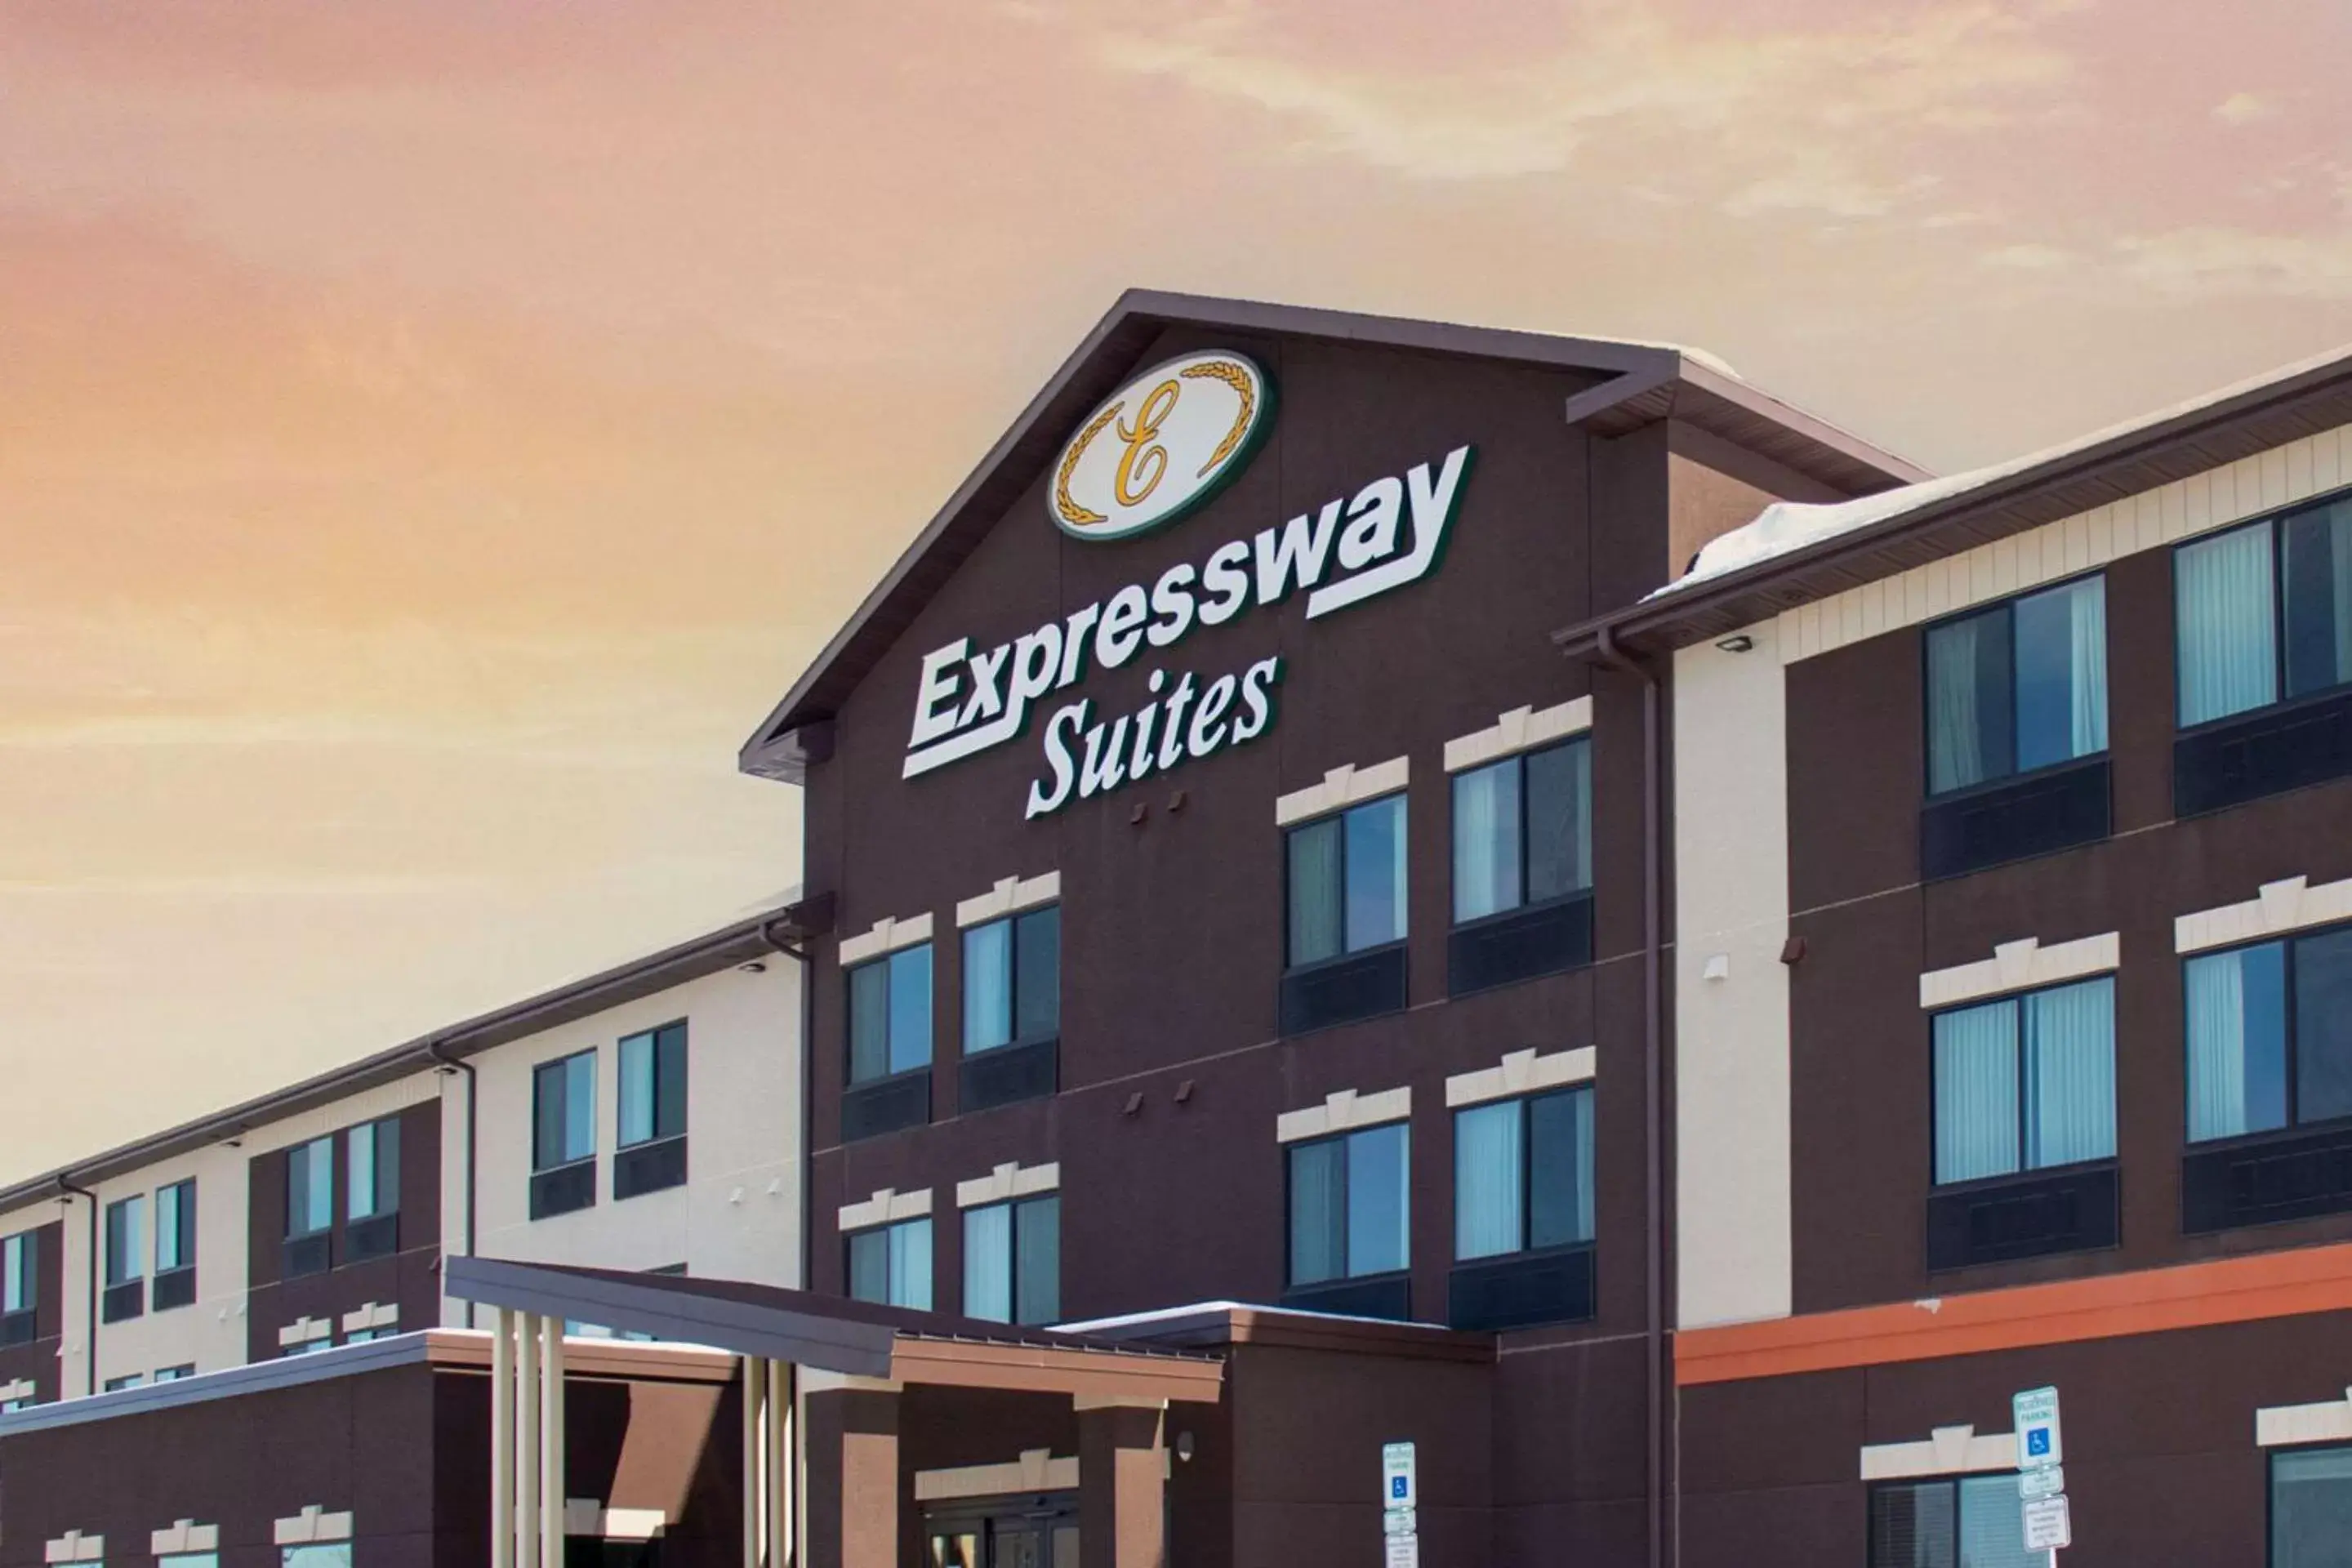 Property Building in Expressway Suites of Grand Forks